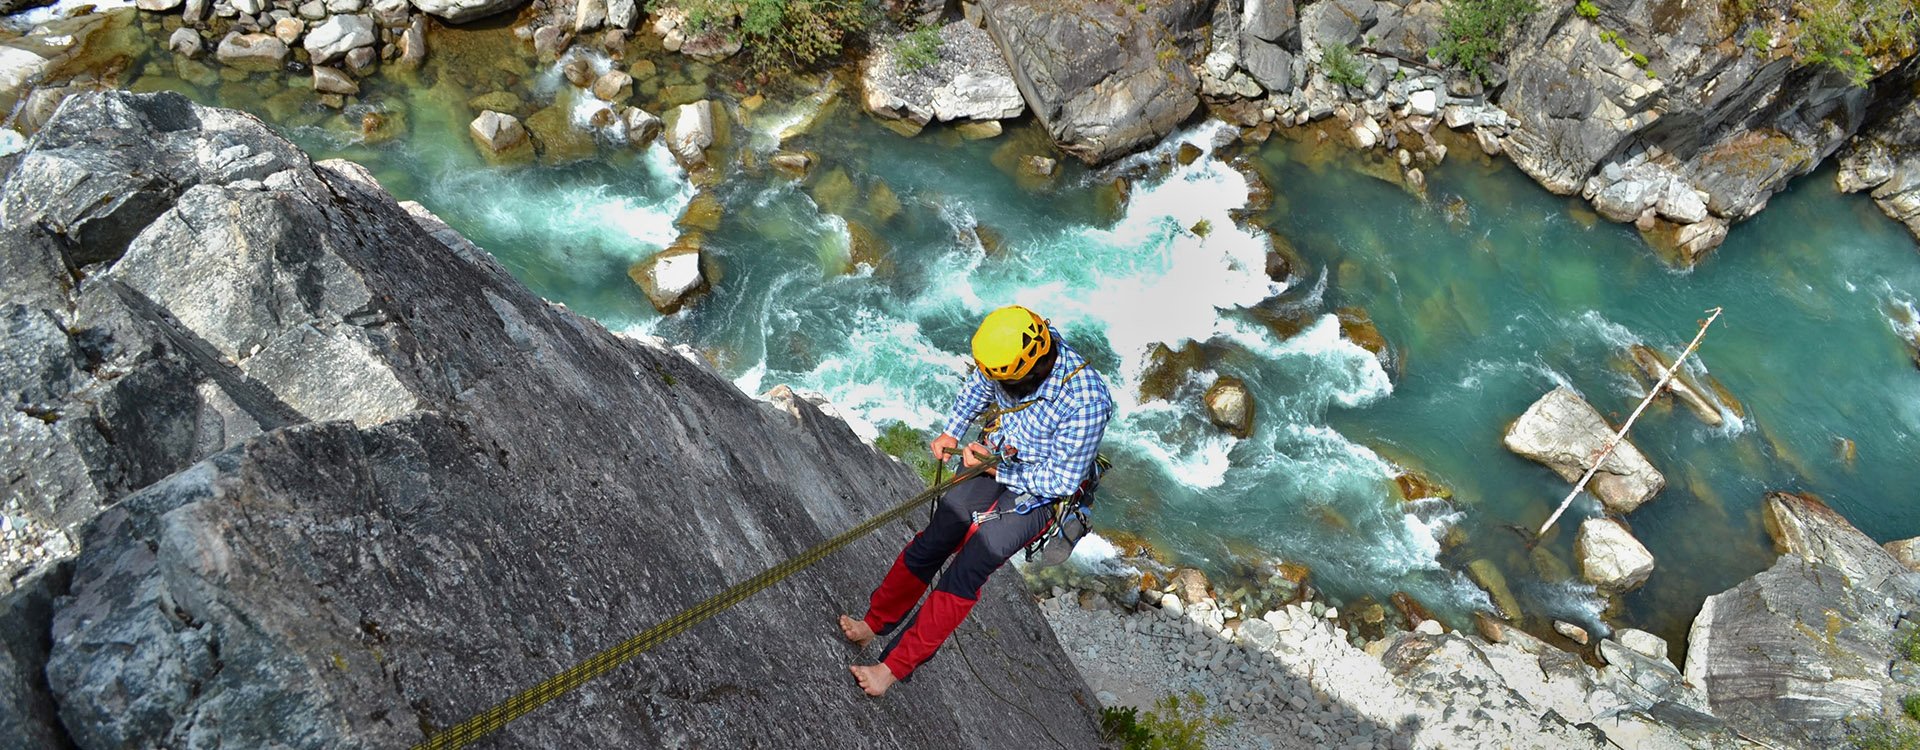 Climbing the majestic Star Chek multi-pitch route south of Whistler. Young man rappels beautiful climbing route above the wild river